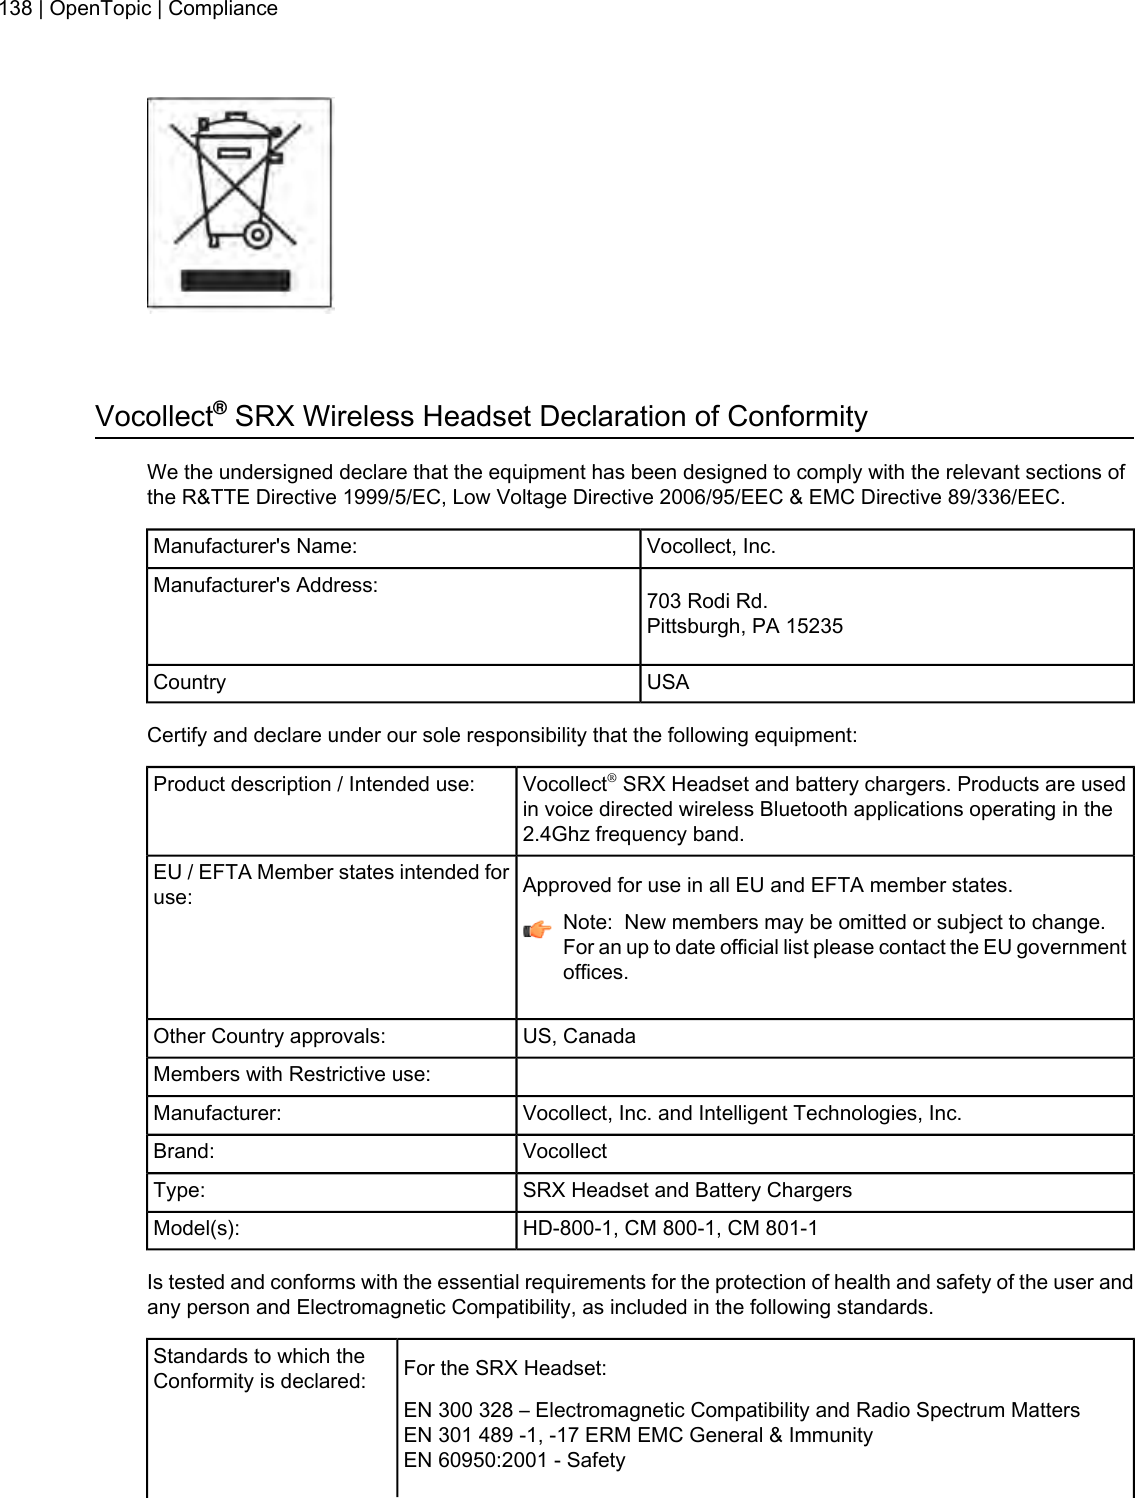 Vocollect®SRX Wireless Headset Declaration of ConformityWe the undersigned declare that the equipment has been designed to comply with the relevant sections ofthe R&amp;TTE Directive 1999/5/EC, Low Voltage Directive 2006/95/EEC &amp; EMC Directive 89/336/EEC.Vocollect, Inc.Manufacturer&apos;s Name:703 Rodi Rd.Pittsburgh, PA 15235Manufacturer&apos;s Address:USACountryCertify and declare under our sole responsibility that the following equipment:Vocollect®SRX Headset and battery chargers. Products are usedin voice directed wireless Bluetooth applications operating in the2.4Ghz frequency band.Product description / Intended use:Approved for use in all EU and EFTA member states.EU / EFTA Member states intended foruse:Note: New members may be omitted or subject to change.For an up to date official list please contact the EU governmentoffices.US, CanadaOther Country approvals:Members with Restrictive use:Vocollect, Inc. and Intelligent Technologies, Inc.Manufacturer:VocollectBrand:SRX Headset and Battery ChargersType:HD-800-1, CM 800-1, CM 801-1Model(s):Is tested and conforms with the essential requirements for the protection of health and safety of the user andany person and Electromagnetic Compatibility, as included in the following standards.For the SRX Headset:Standards to which theConformity is declared:EN 300 328 – Electromagnetic Compatibility and Radio Spectrum MattersEN 301 489 -1, -17 ERM EMC General &amp; ImmunityEN 60950:2001 - Safety138 | OpenTopic | Compliance